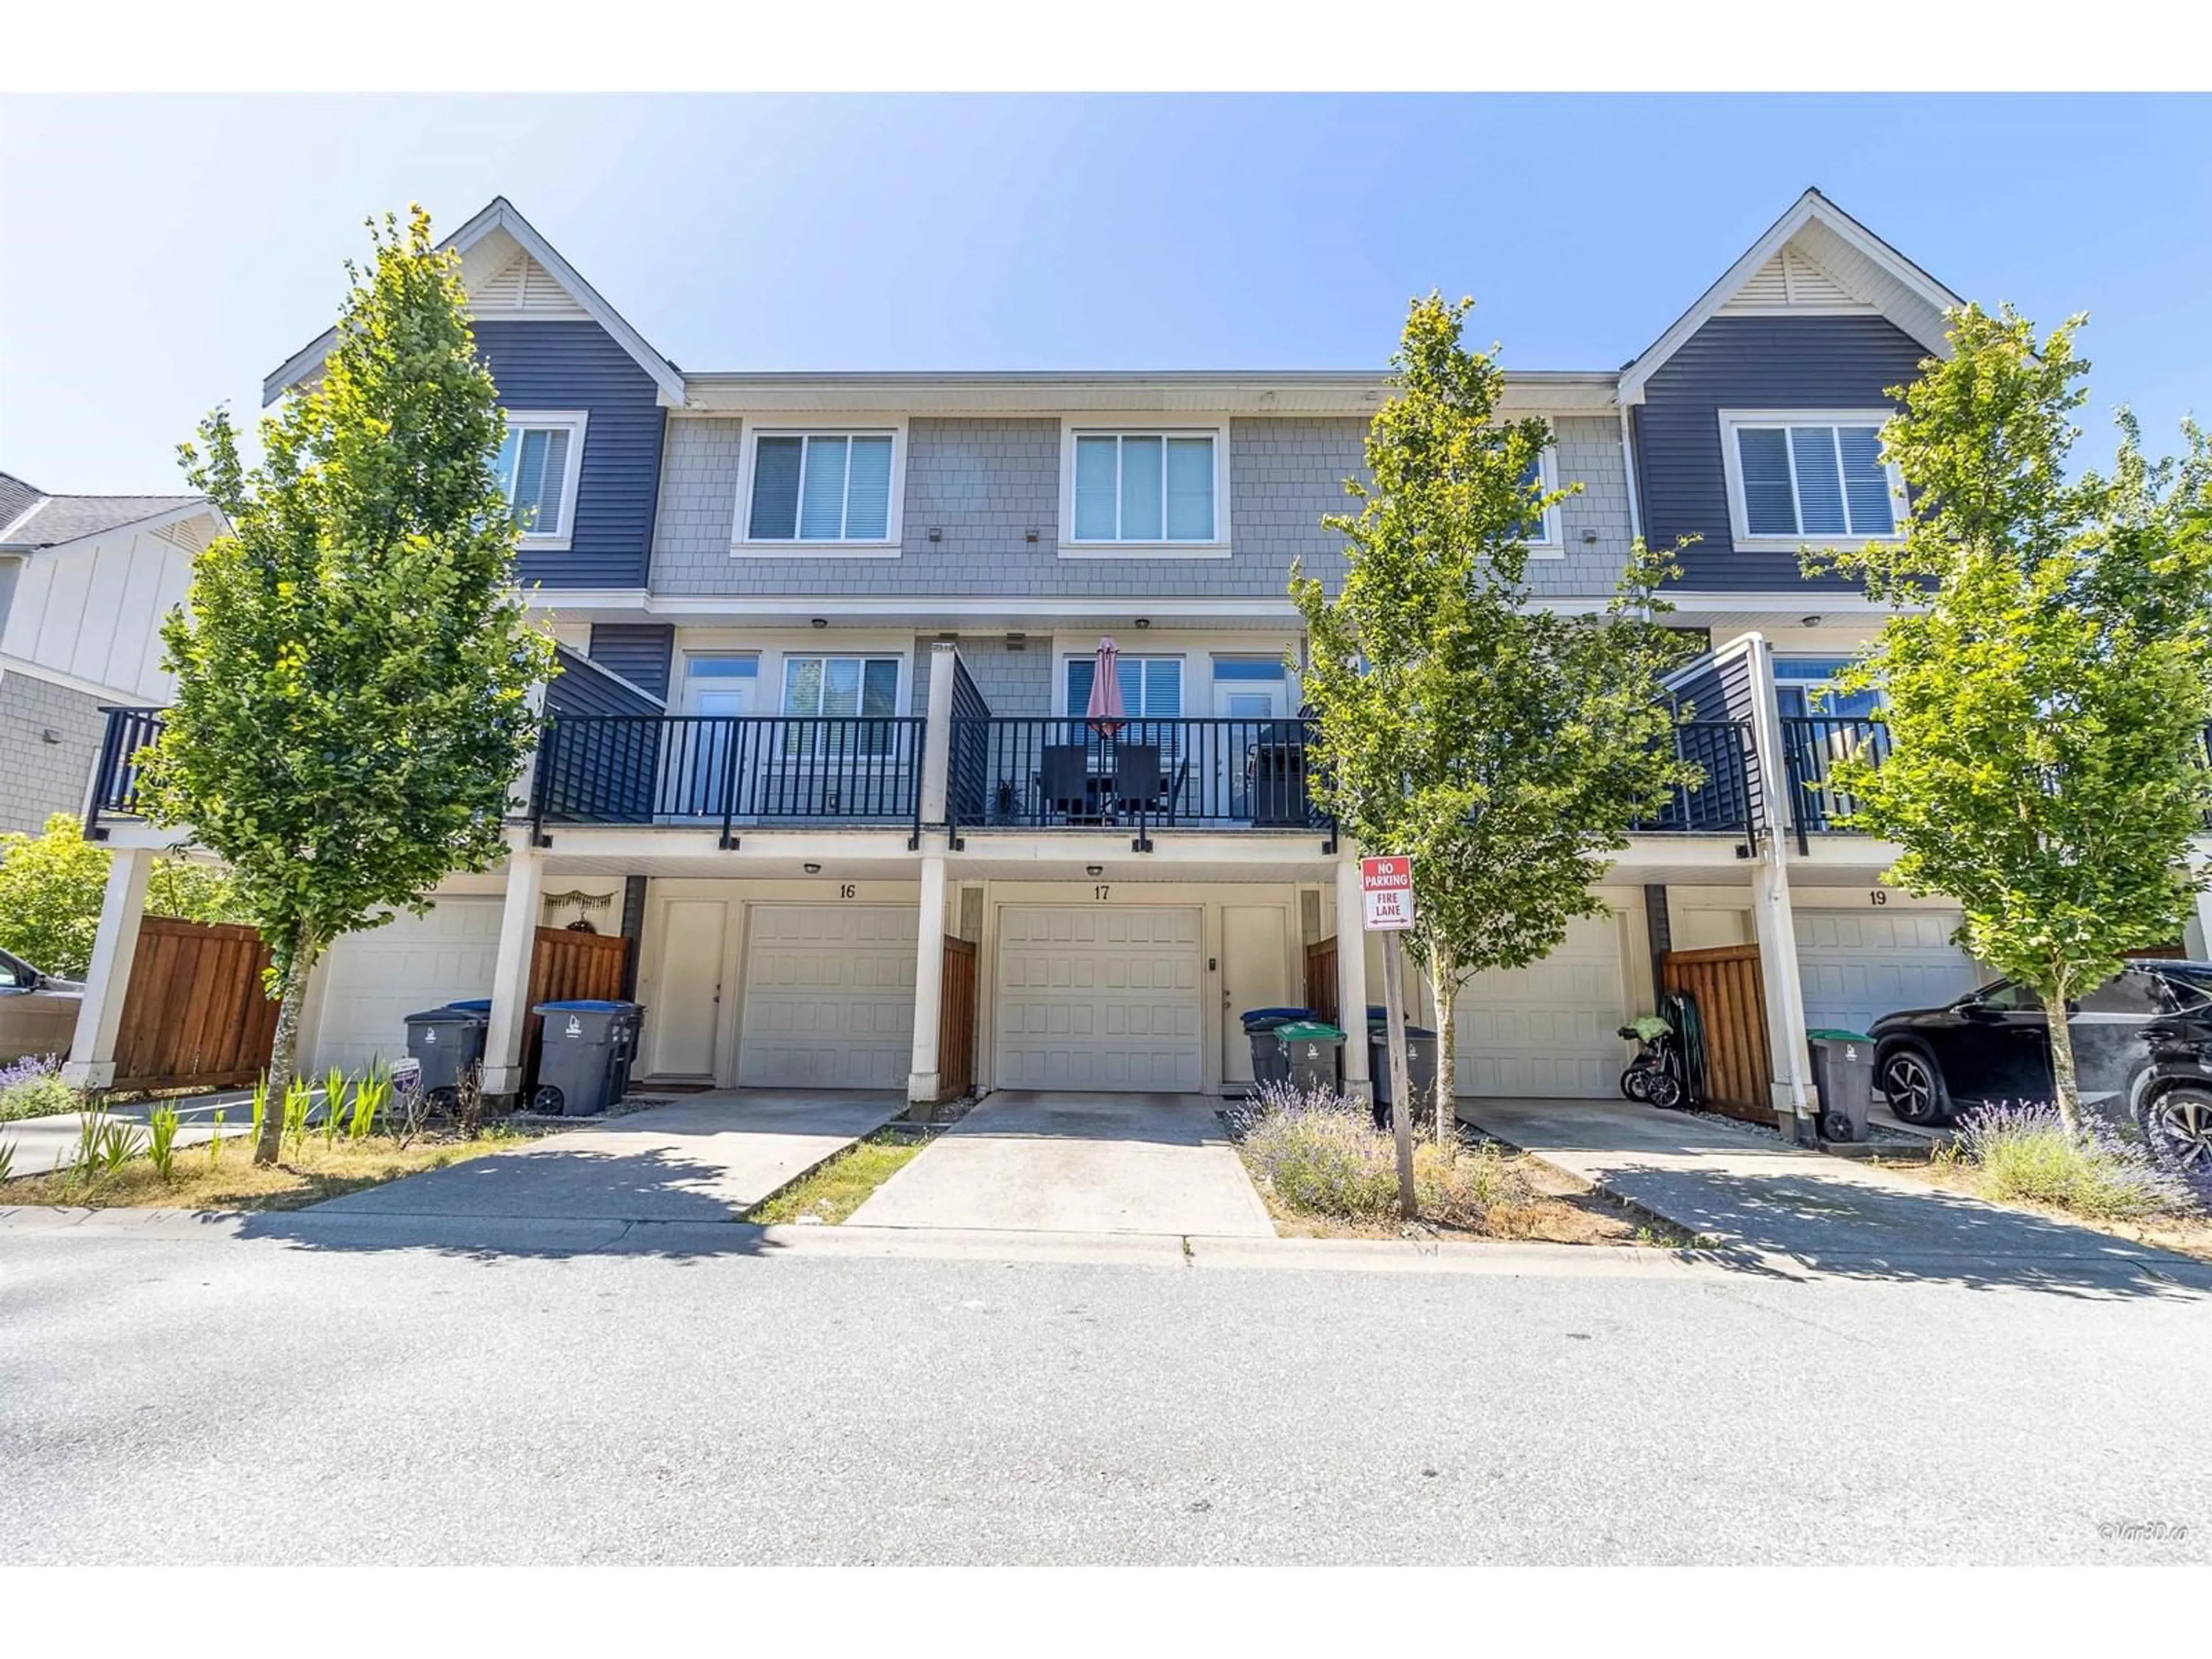 A pic from exterior of the house or condo for 18 8699 158 STREET, Surrey British Columbia V4N1G9